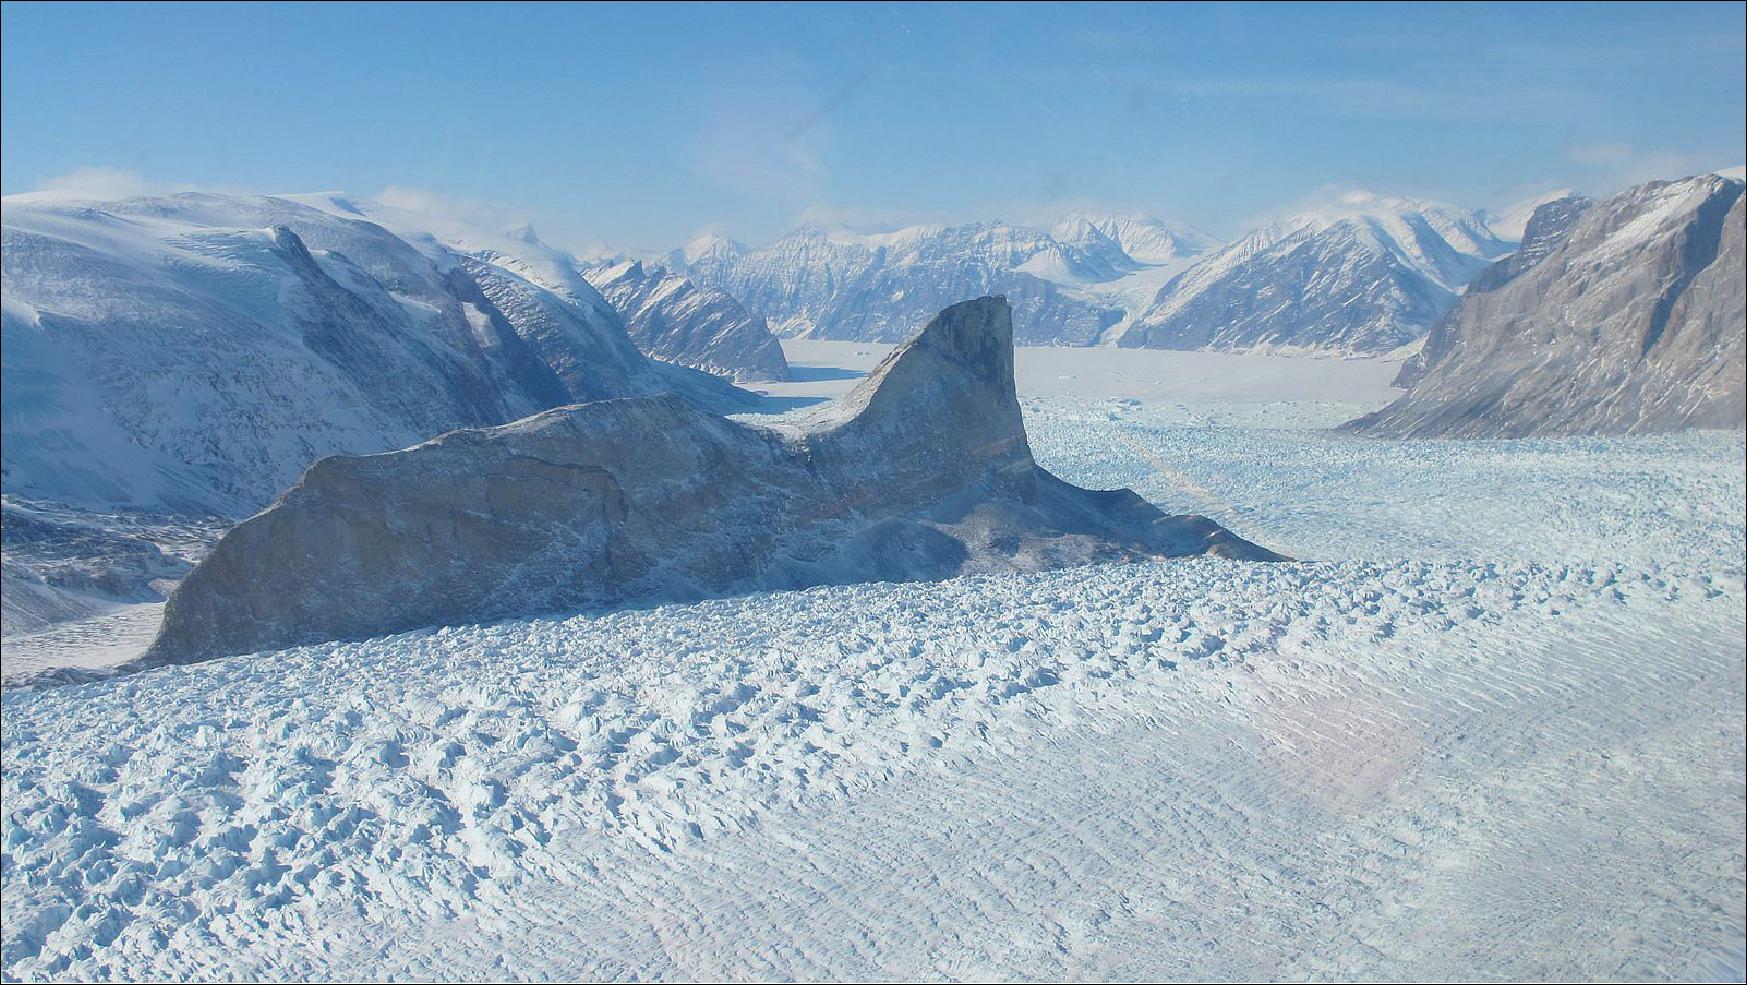 Figure 37: The Kangerdlugssup (pictured) and Jakobshavn glaciers in Greenland have lost roughly 14 to 20 feet (4 to 6 meters) of elevation per year over the past 16 years (image credit: NASA, Jim Yungel)